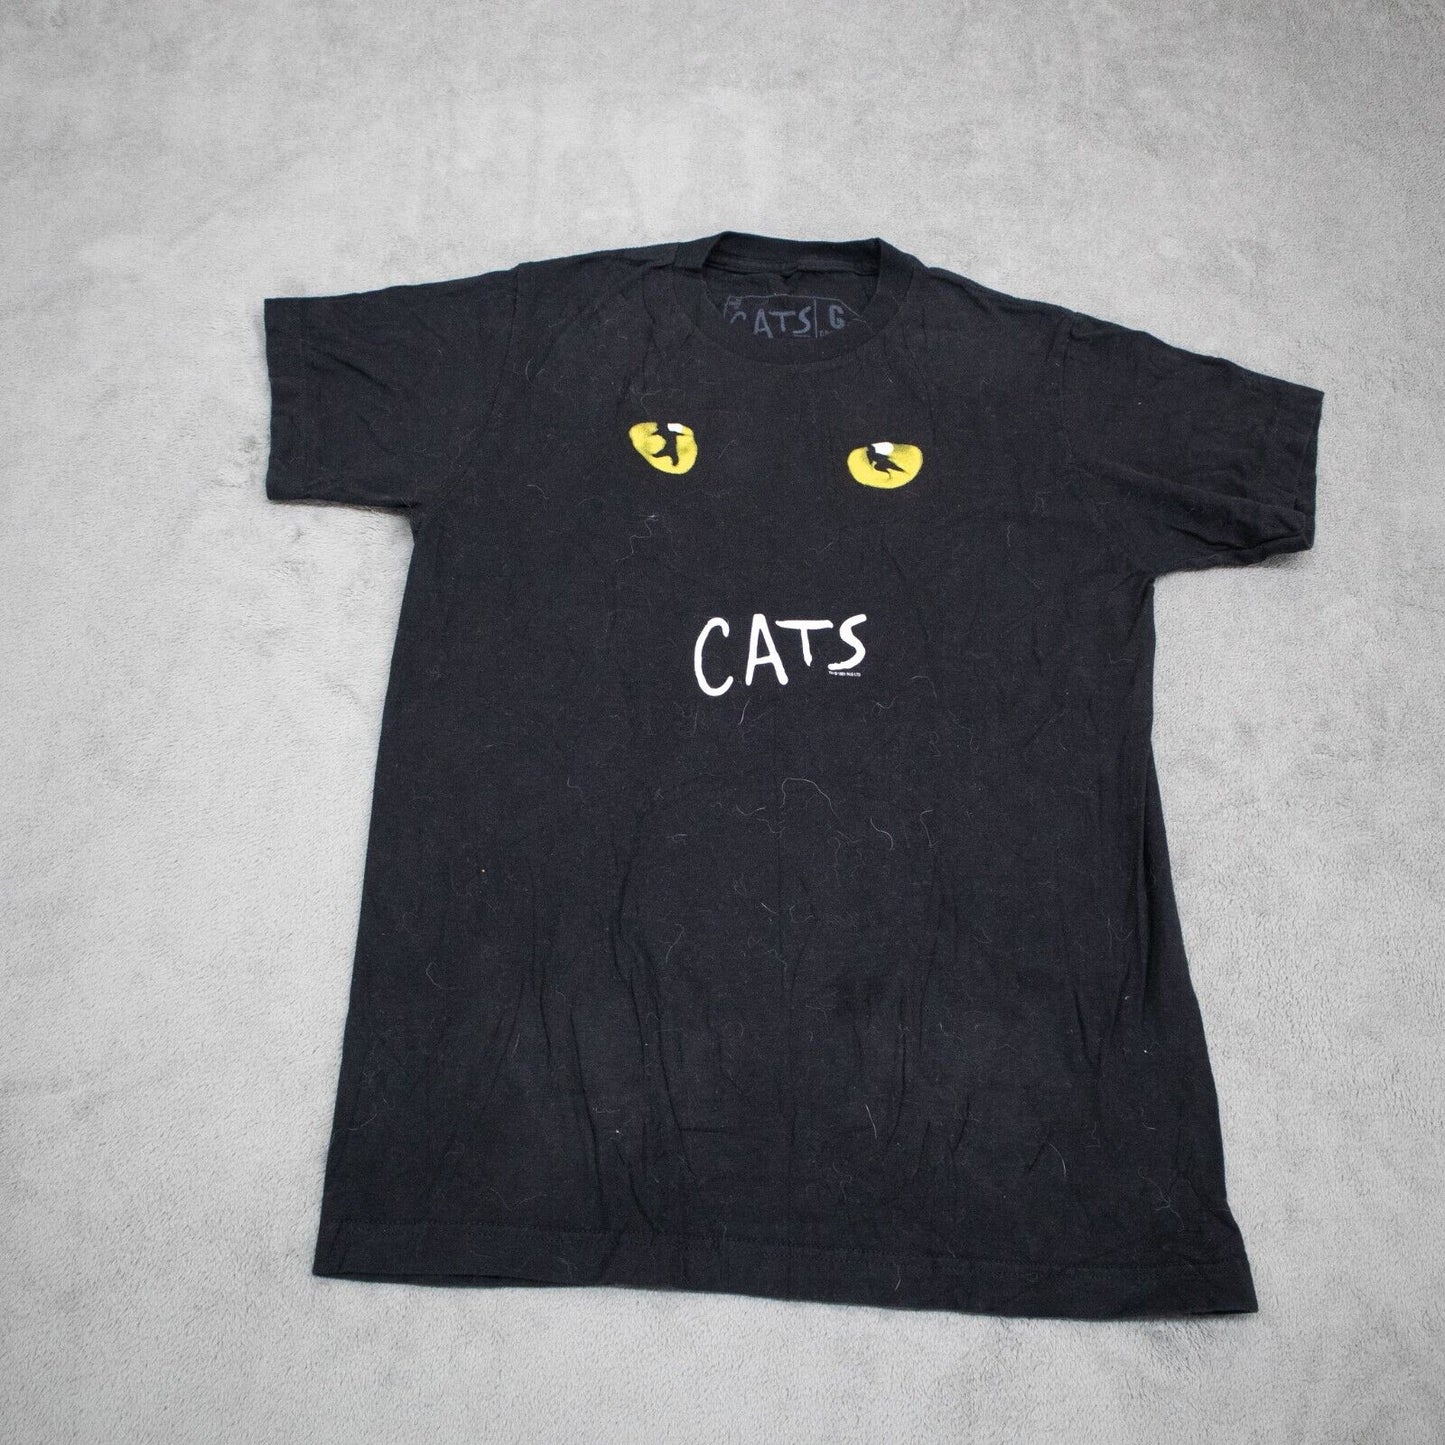 Cats Men's Graphics Cats Slim Fit T-Shirt Short Sleeves Solid Black Size Small